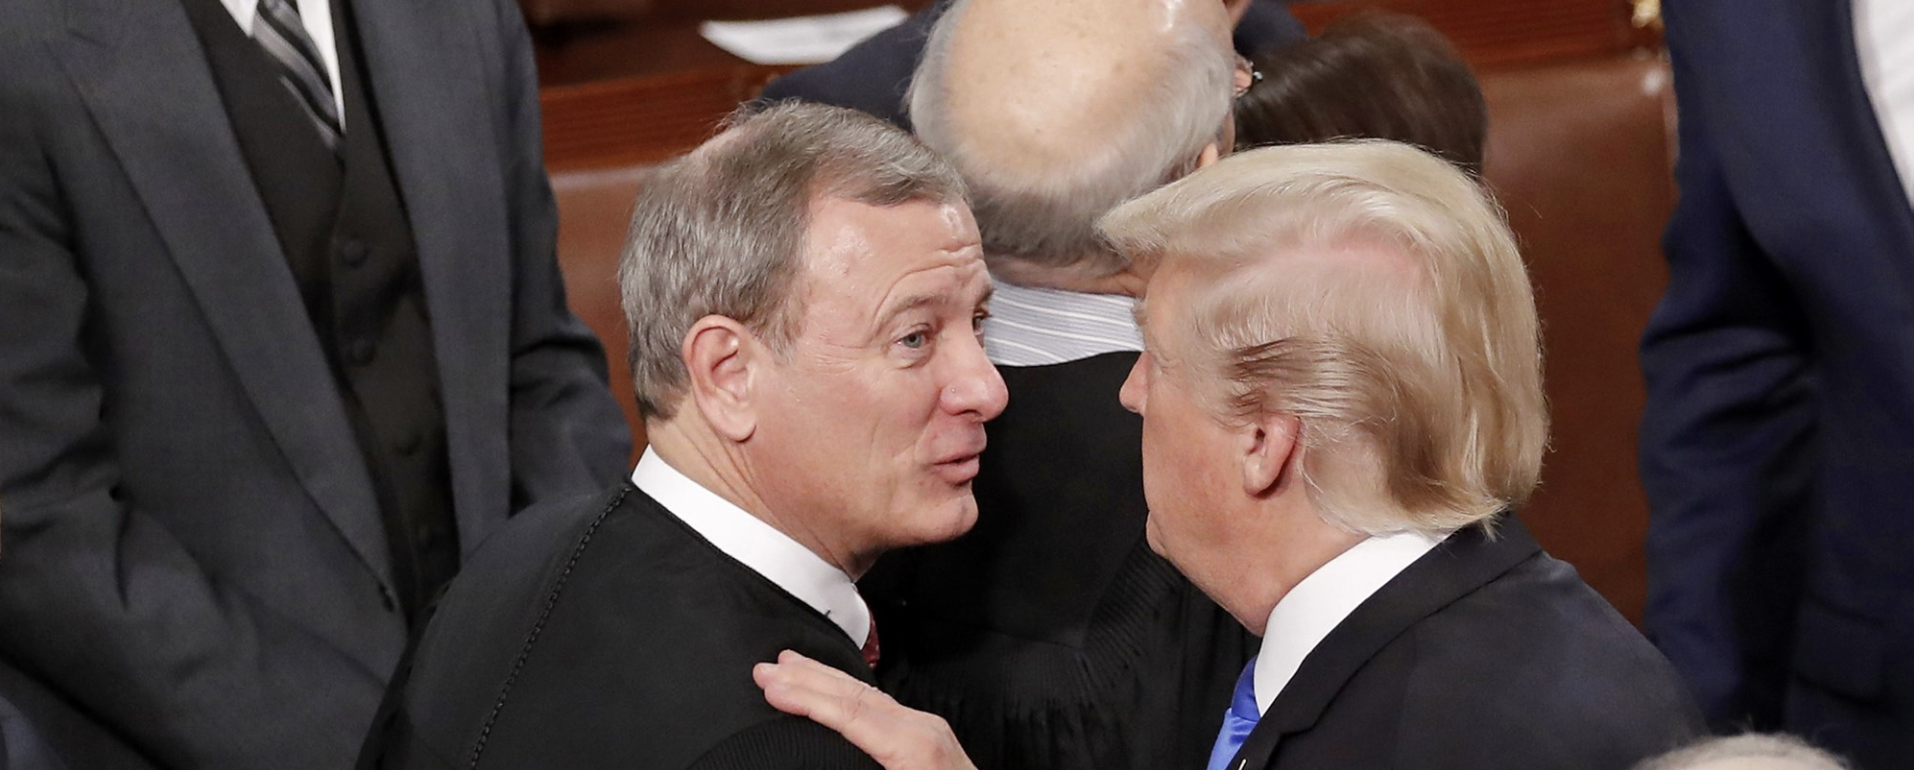 OPINION: Shouldn't Chief Justice John Roberts Be a Witness, Not a ...